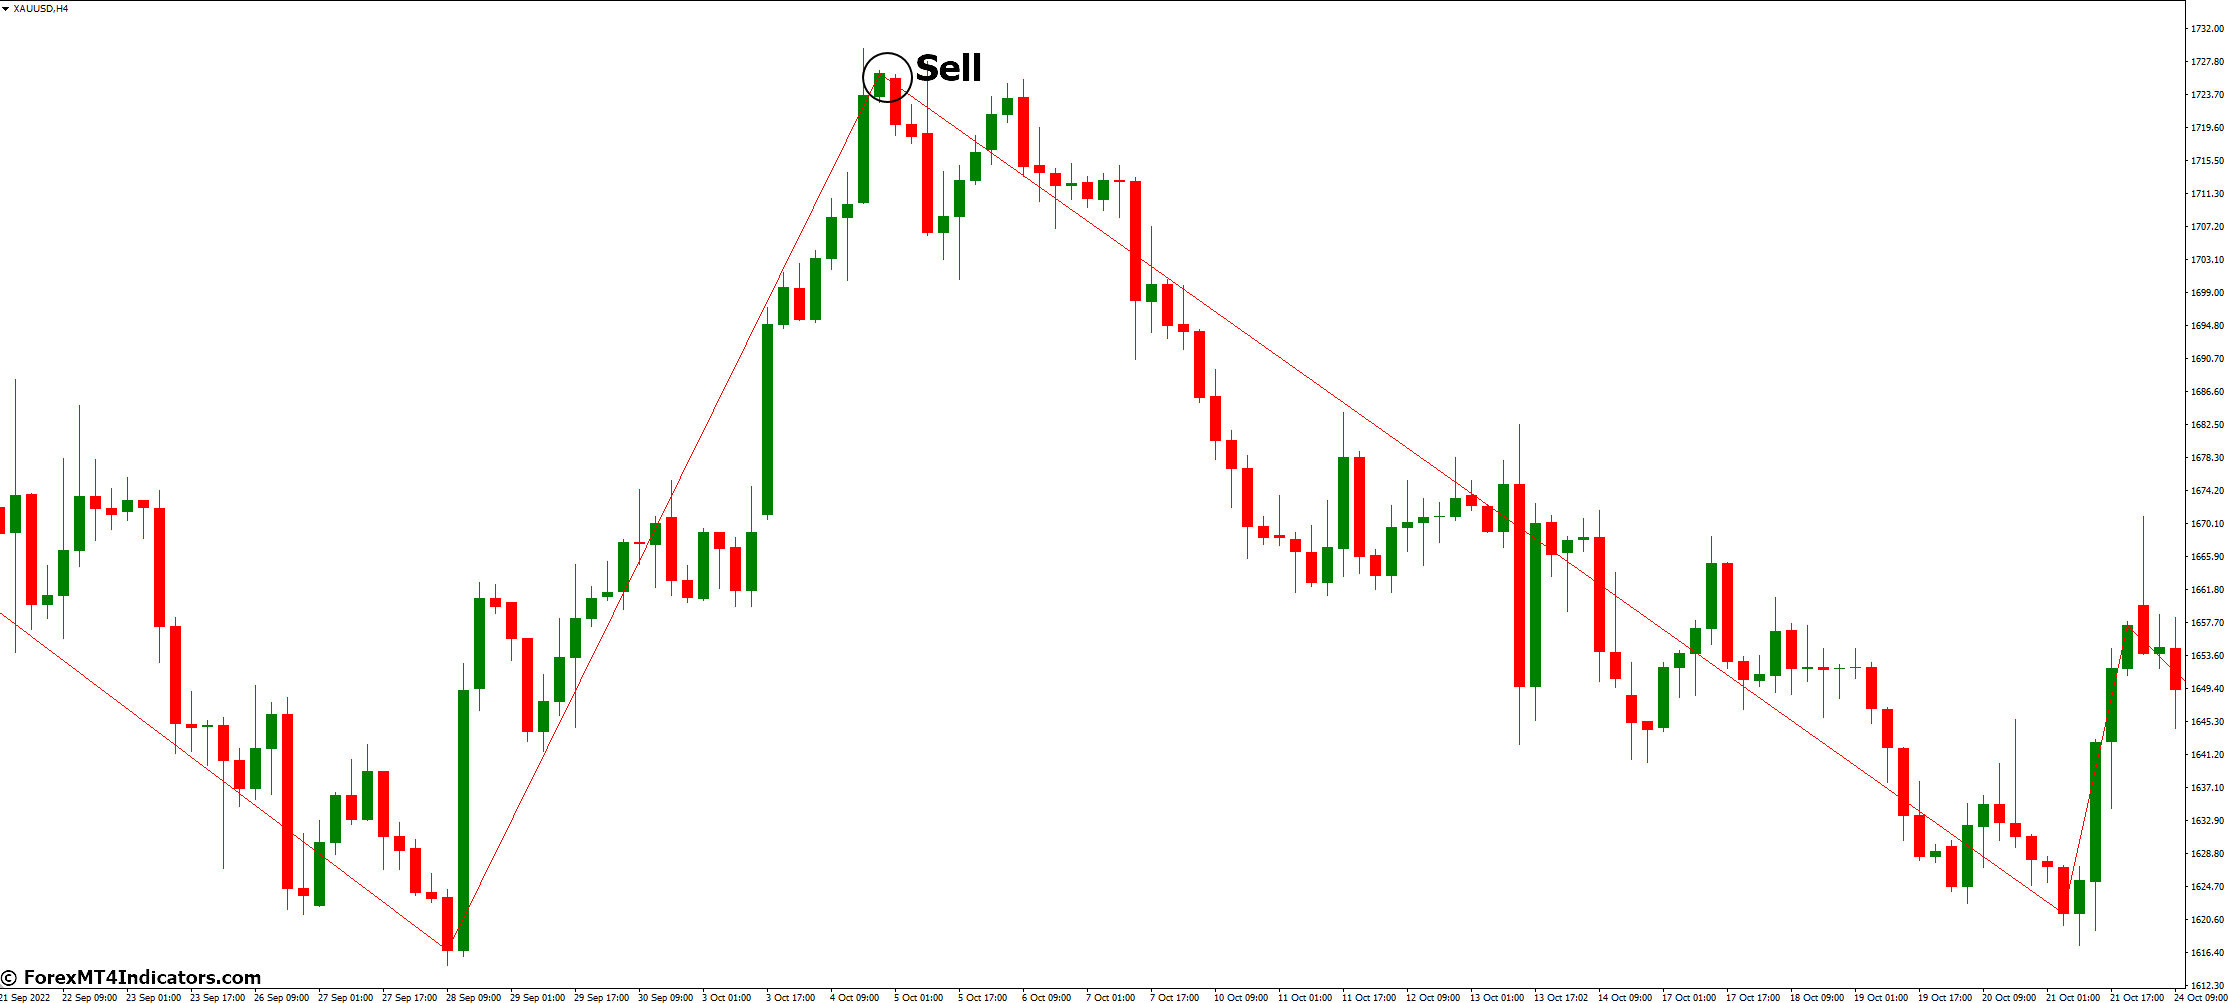 How to Trade with ZigZag Close MT4 Indicator - Sell Entry